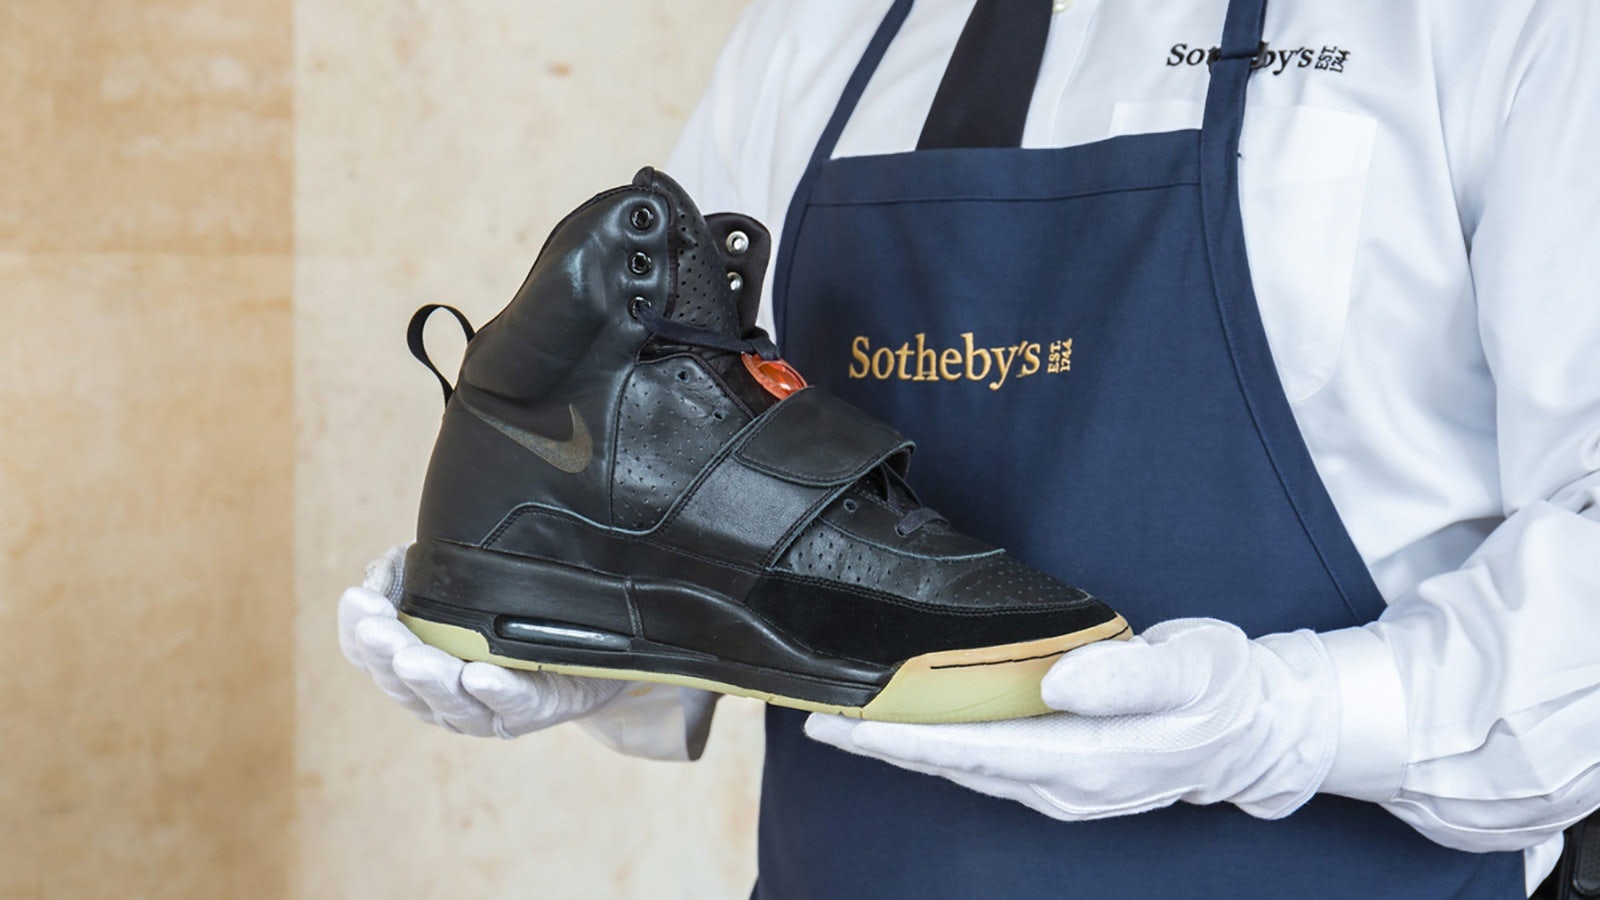 The Nike Air Yeezy 1 prototype sneakers sold for $1.8 million on Sotheby's, the highest price ever paid for any pair of sneakers. Photo: Sotheby's